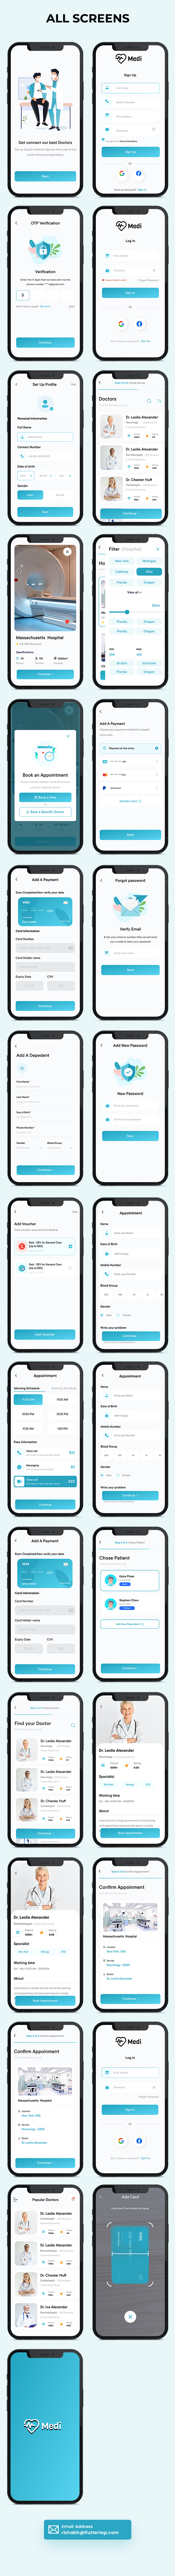 Medi - Doctor Appointment Booking Flutter App UI Template - 2